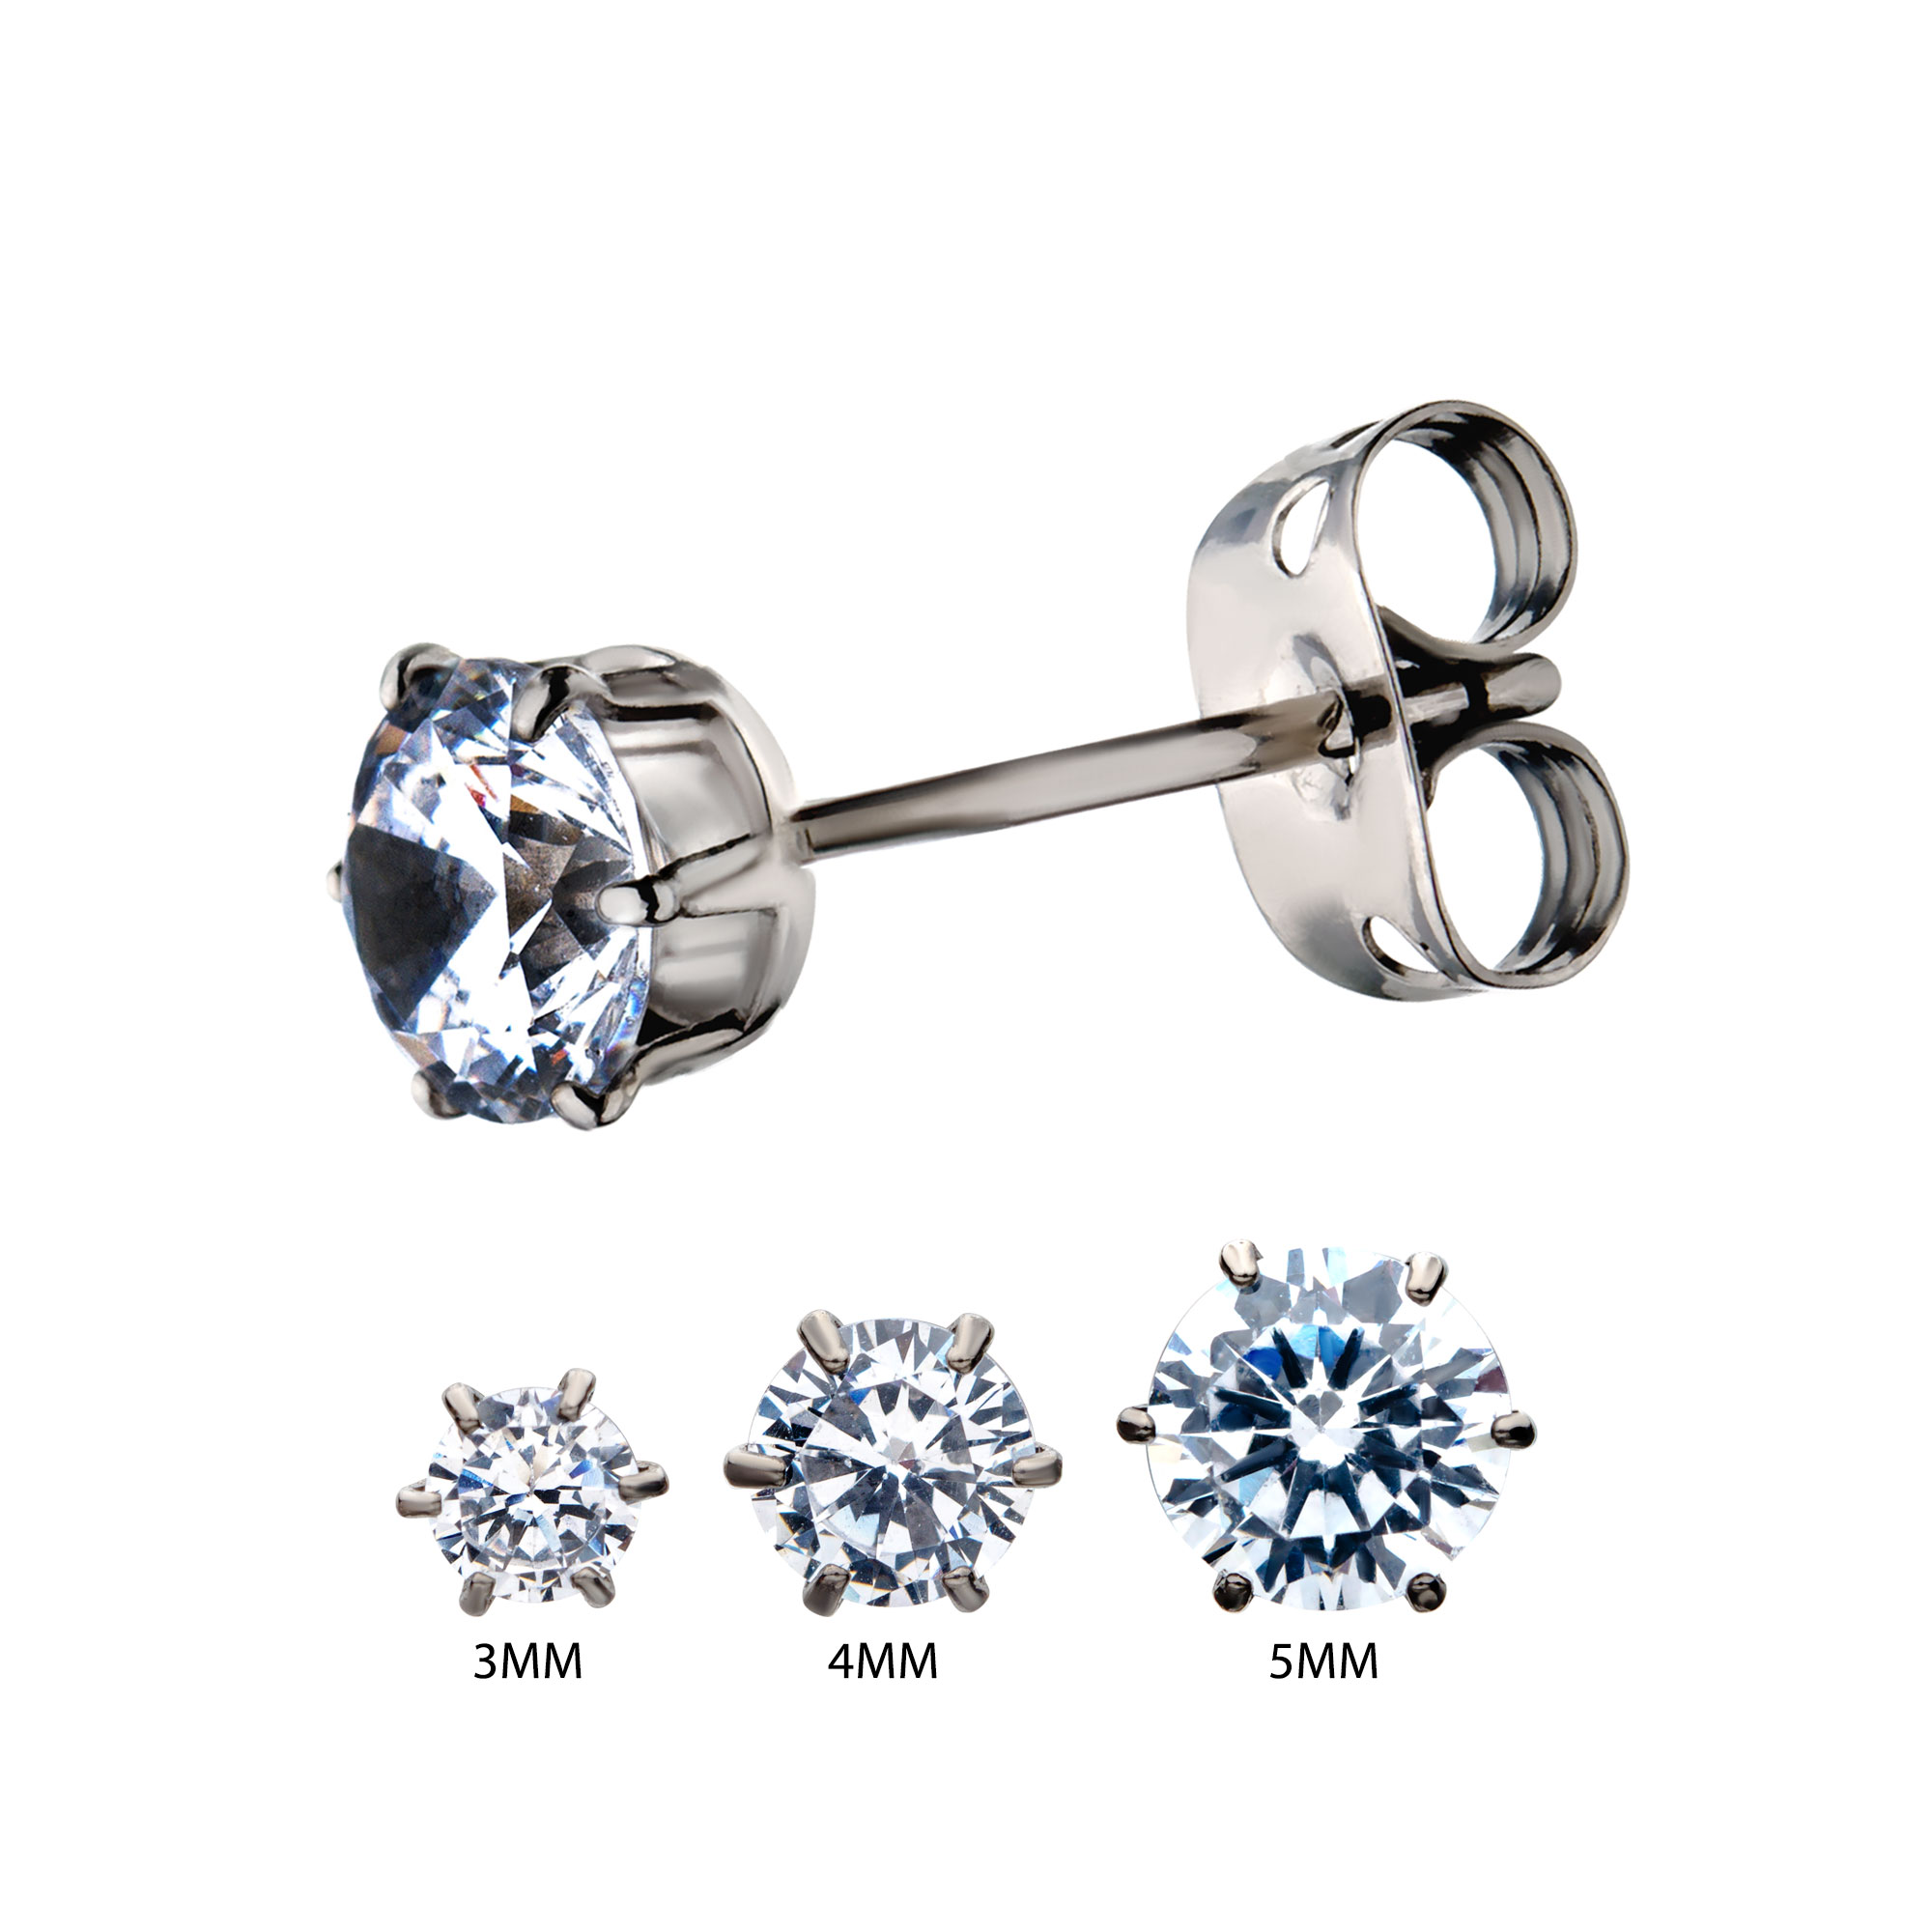 20g Titanium Post and Butterfly Back with Prong Set CZ Stud Earrings Spath Jewelers Bartow, FL